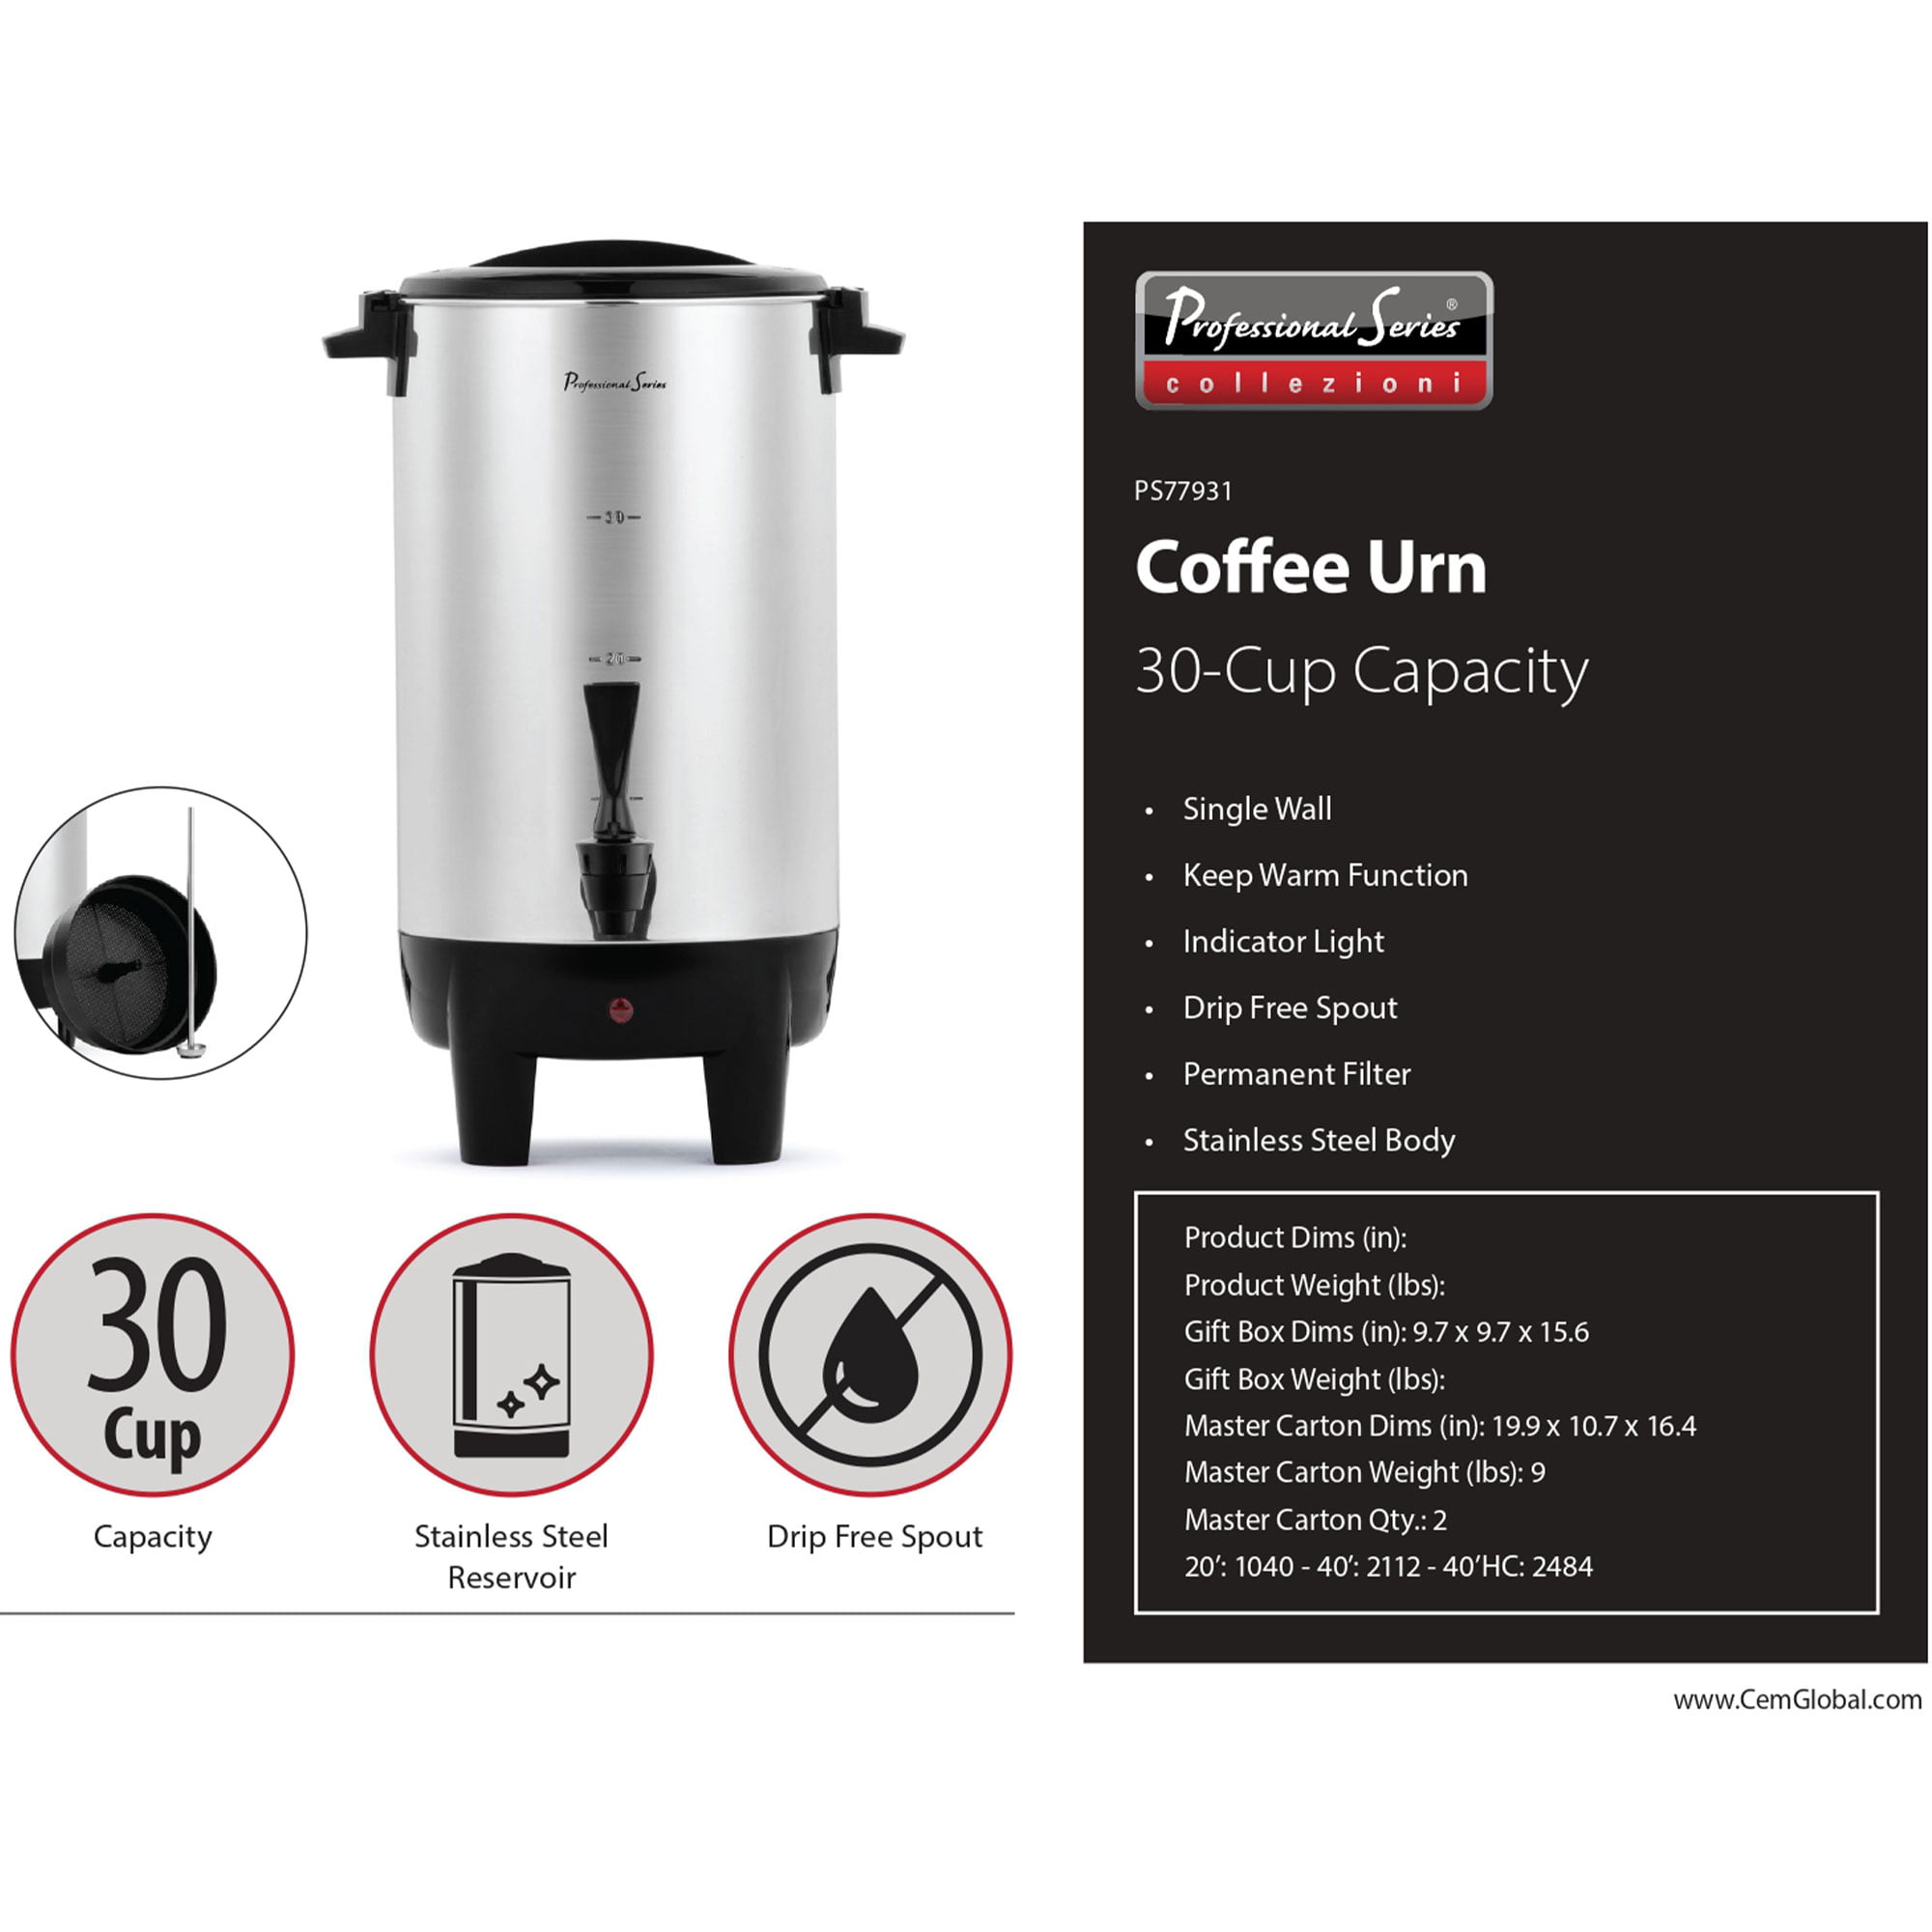 ZHIMIFU Commercial Coffee Urn 30 Cups (5.8 Oz) Stainless Steel Large Coffee  Dispenser 1000 W Electric Coffee Maker Urn Hot Water Urn for Wedding